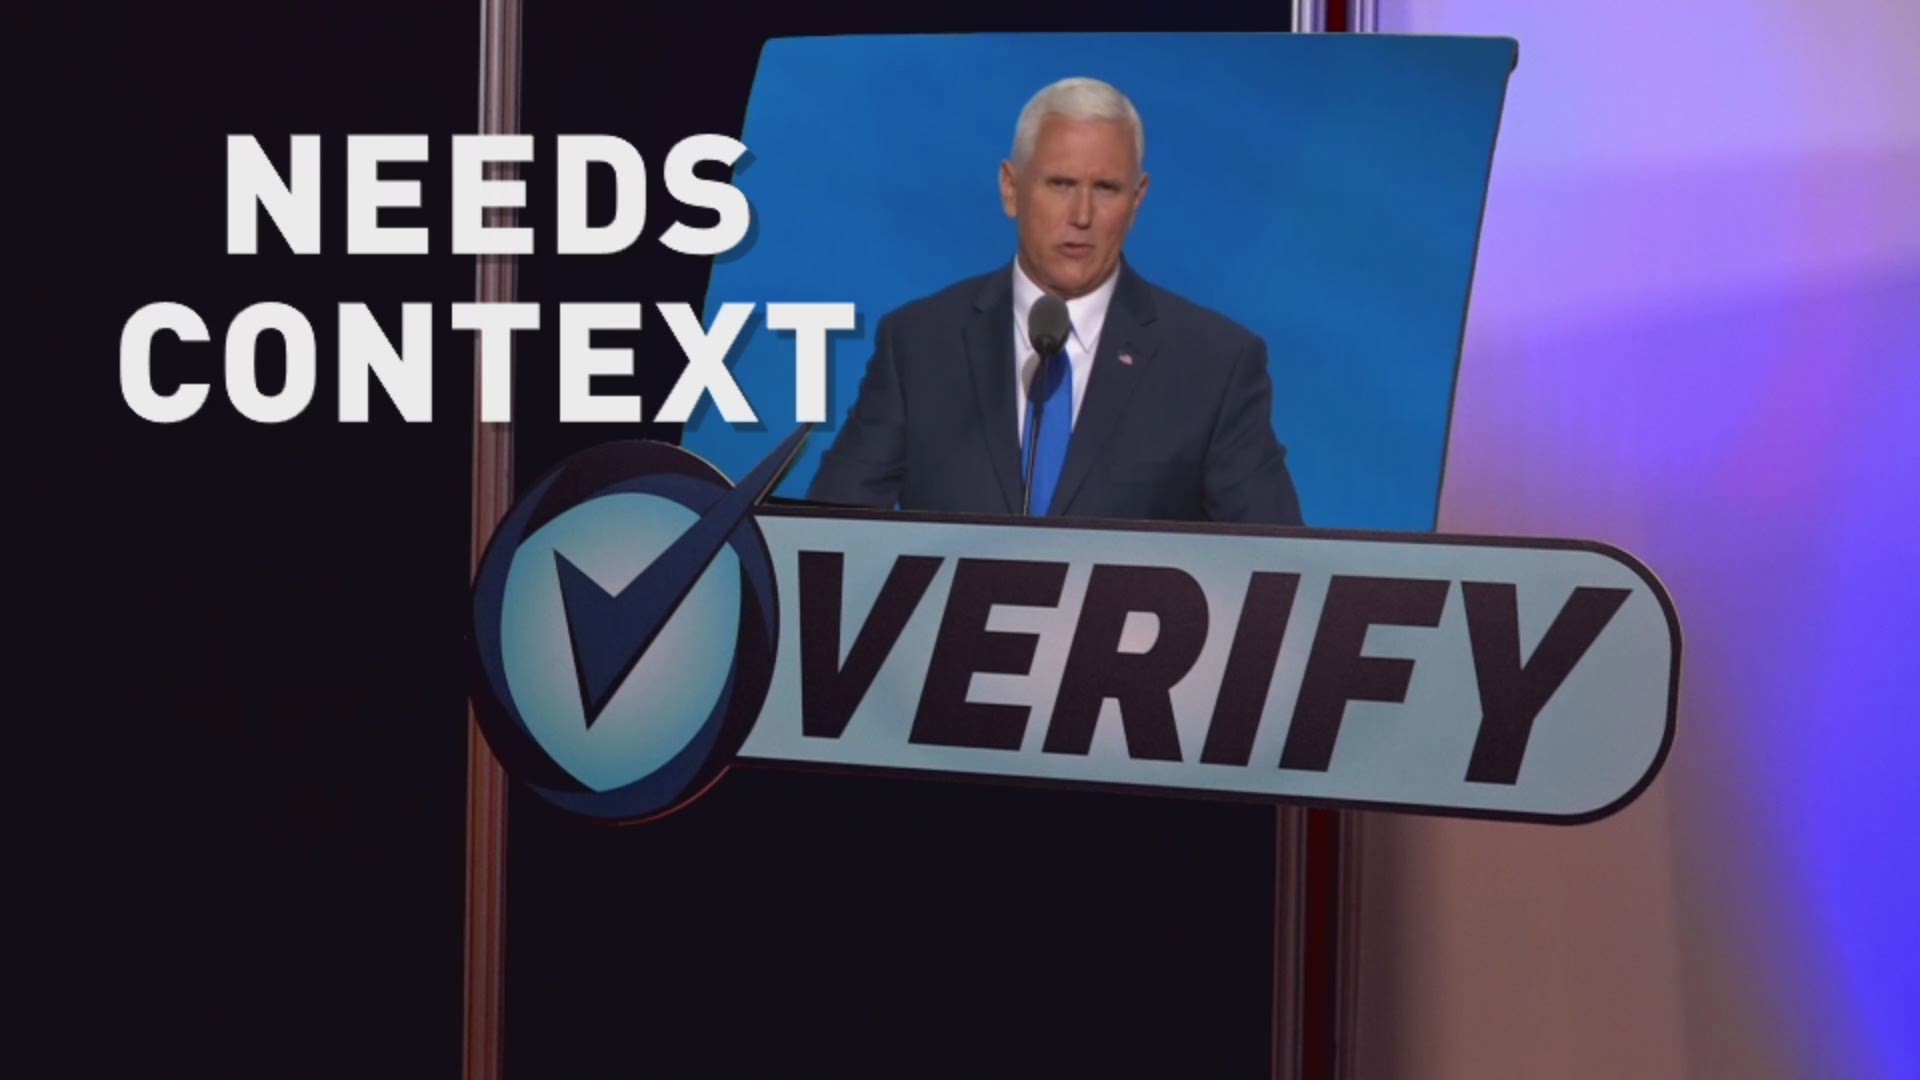 Donald Trump's running mate, Indiana Governor Mike Pence is building a case that he can take a conservative approach from Indiana and use it to tackle the nation's debt and economy. Reporter Brandon Rittiman and the fact checking team researched statement